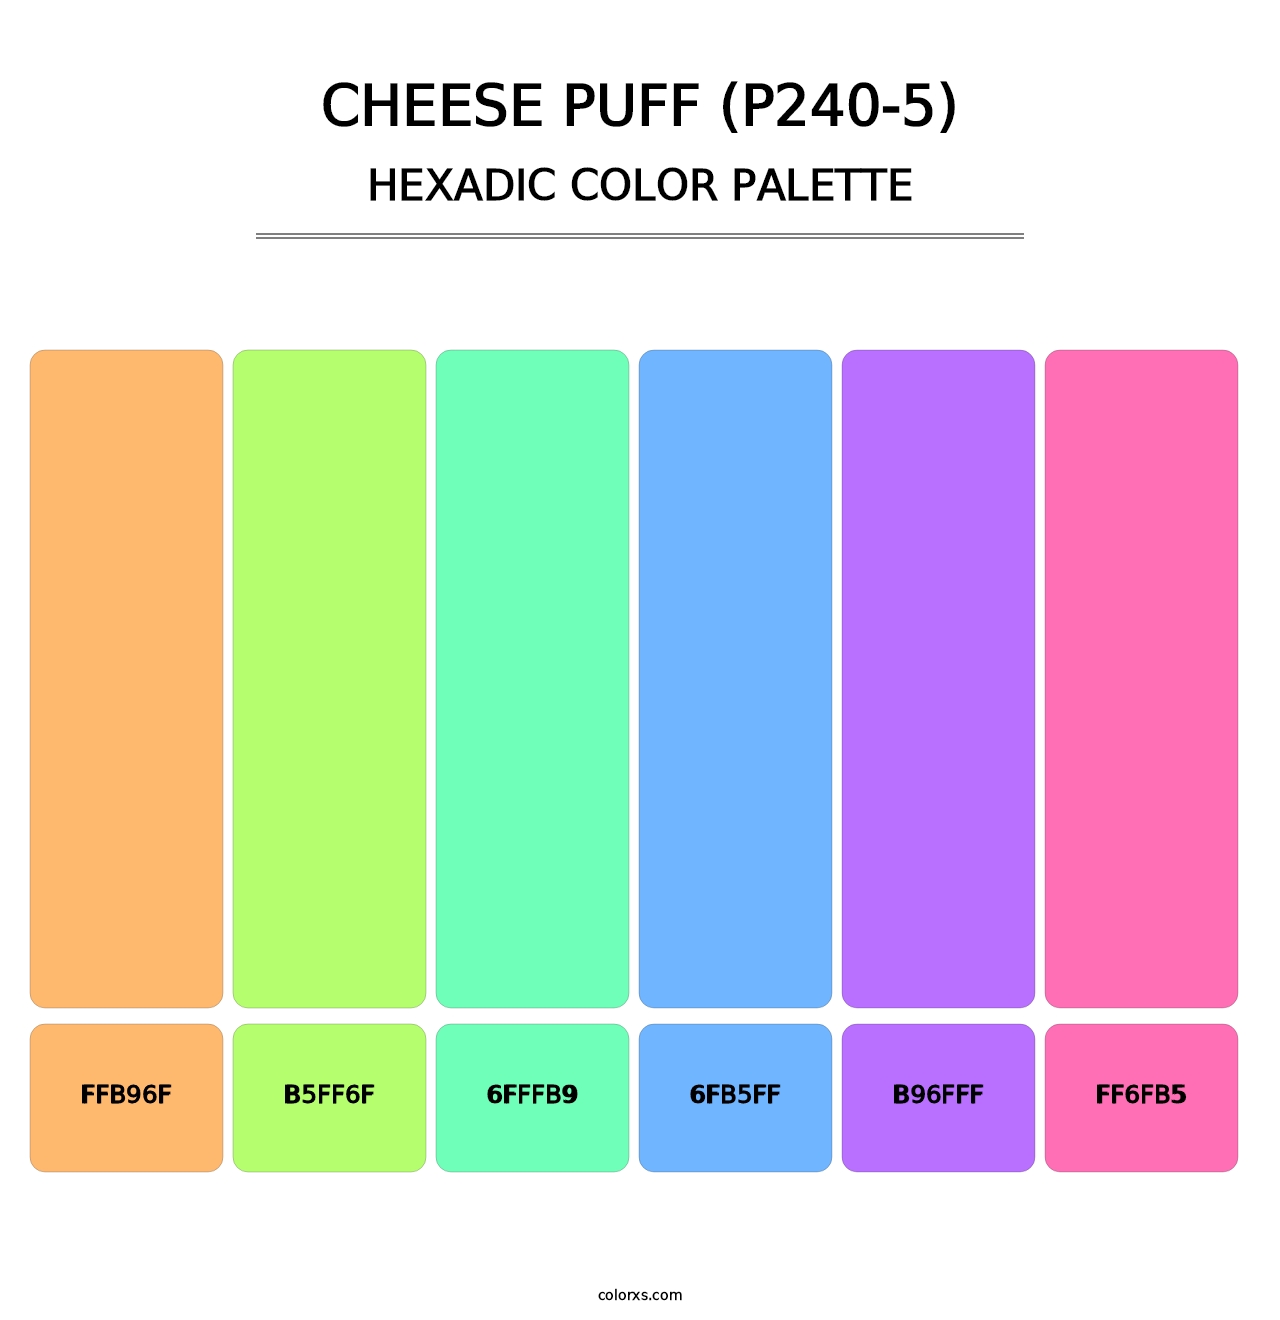 Cheese Puff (P240-5) - Hexadic Color Palette